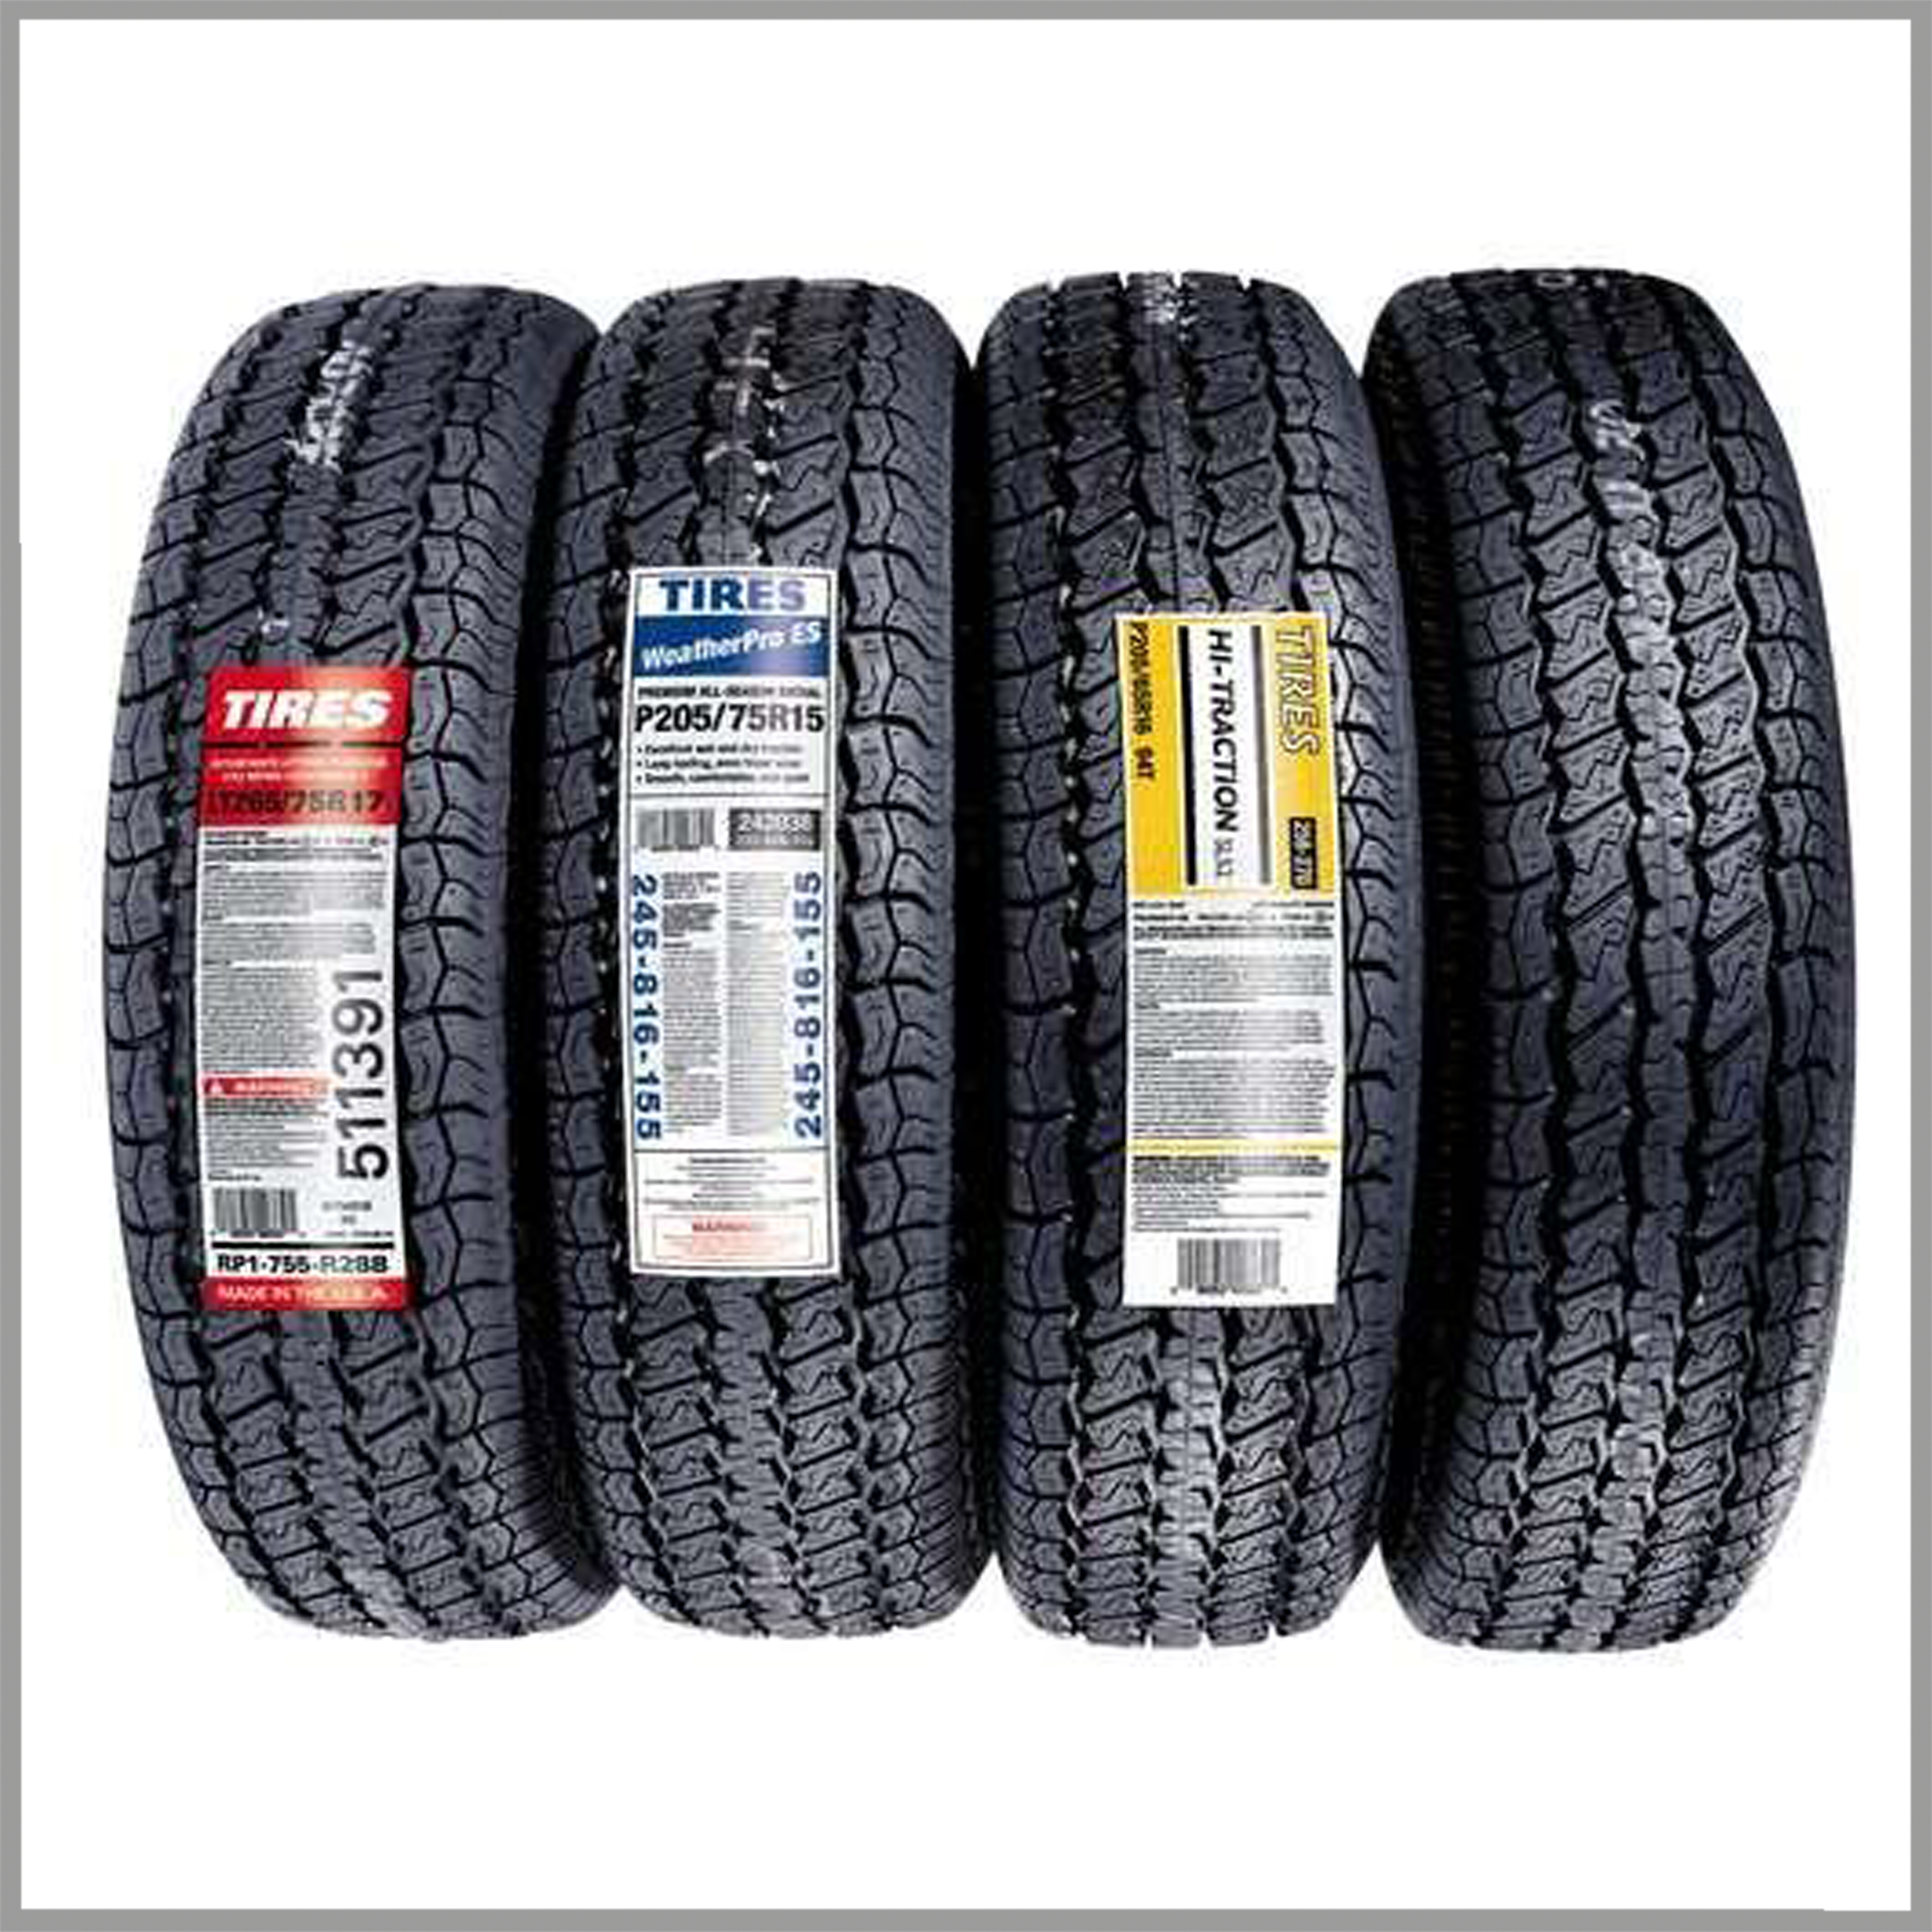 3m-screen-printable-tire-labels.png